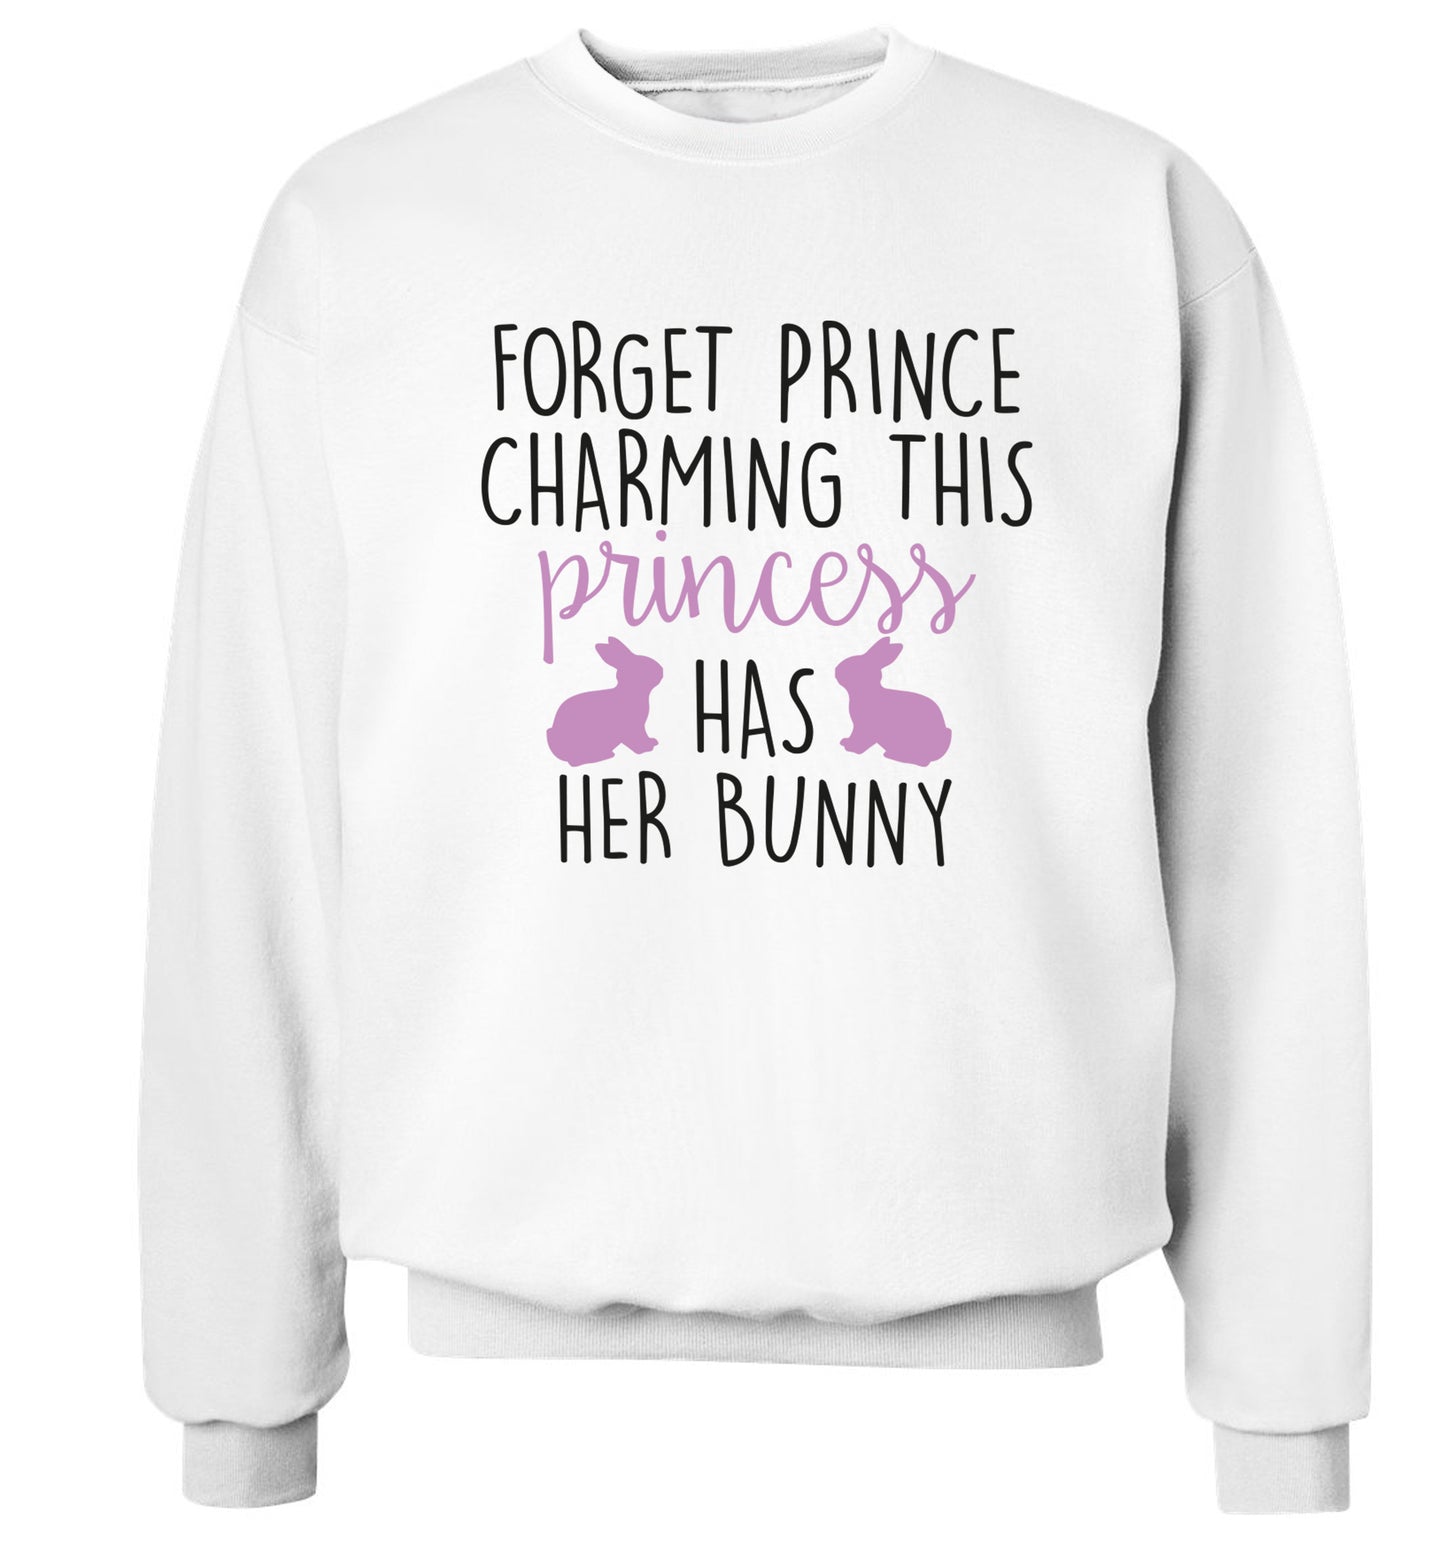 Forget prince charming this princess has her bunny Adult's unisex white  sweater 2XL